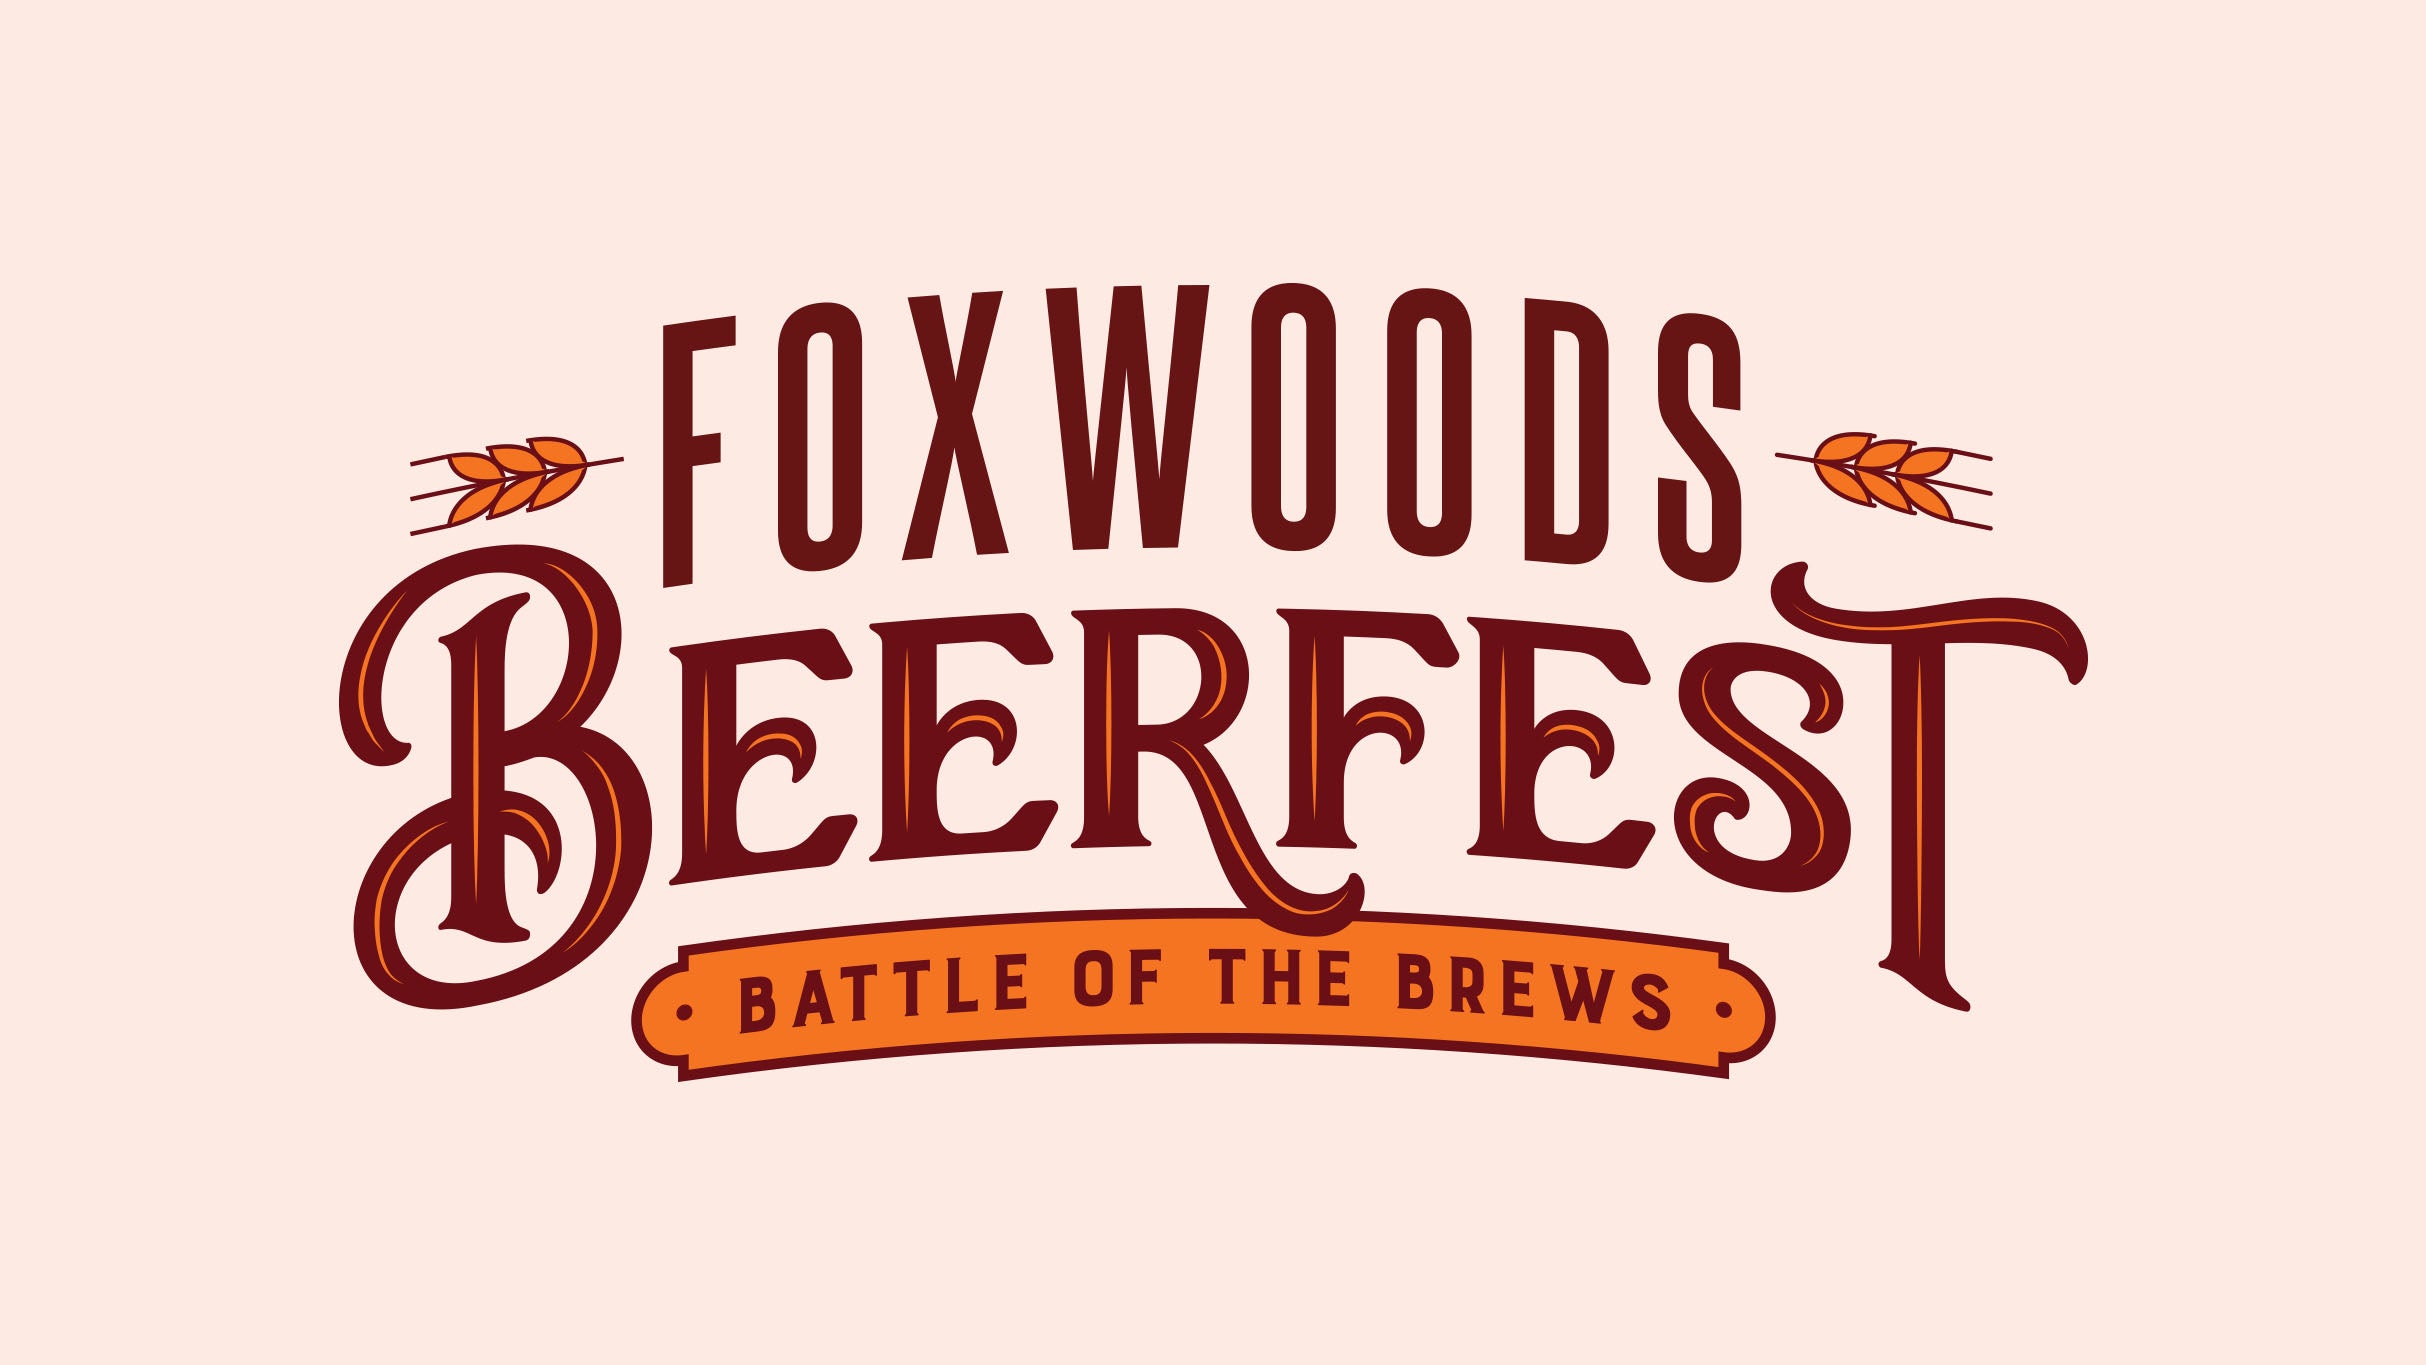 Foxwoods Beerfest in Mashantucket promo photo for Early Bird  presale offer code